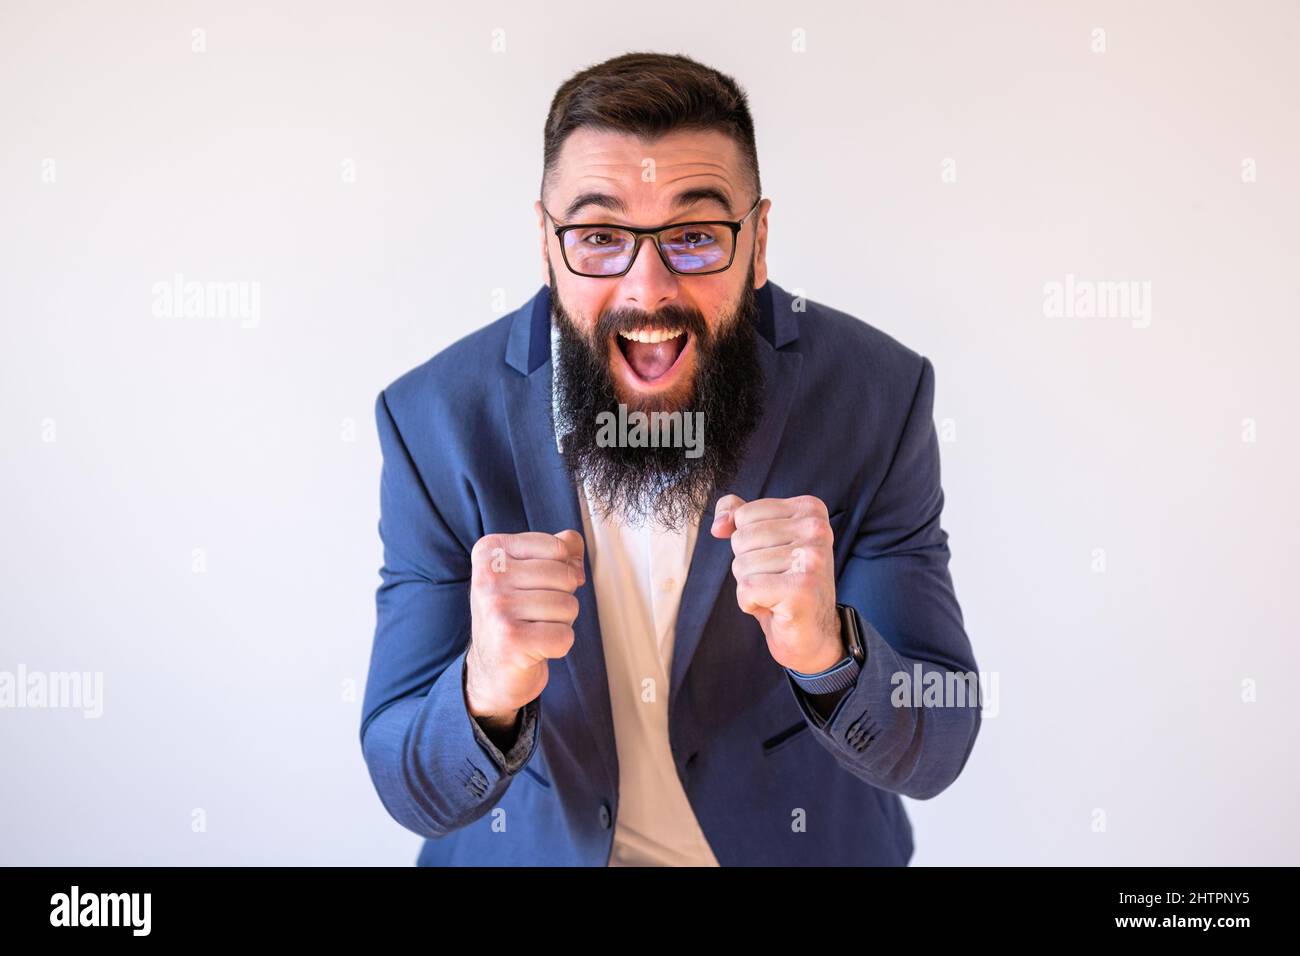 Portrait of ecstatic businessman. Copy space on image for your text or advert. Stock Photo